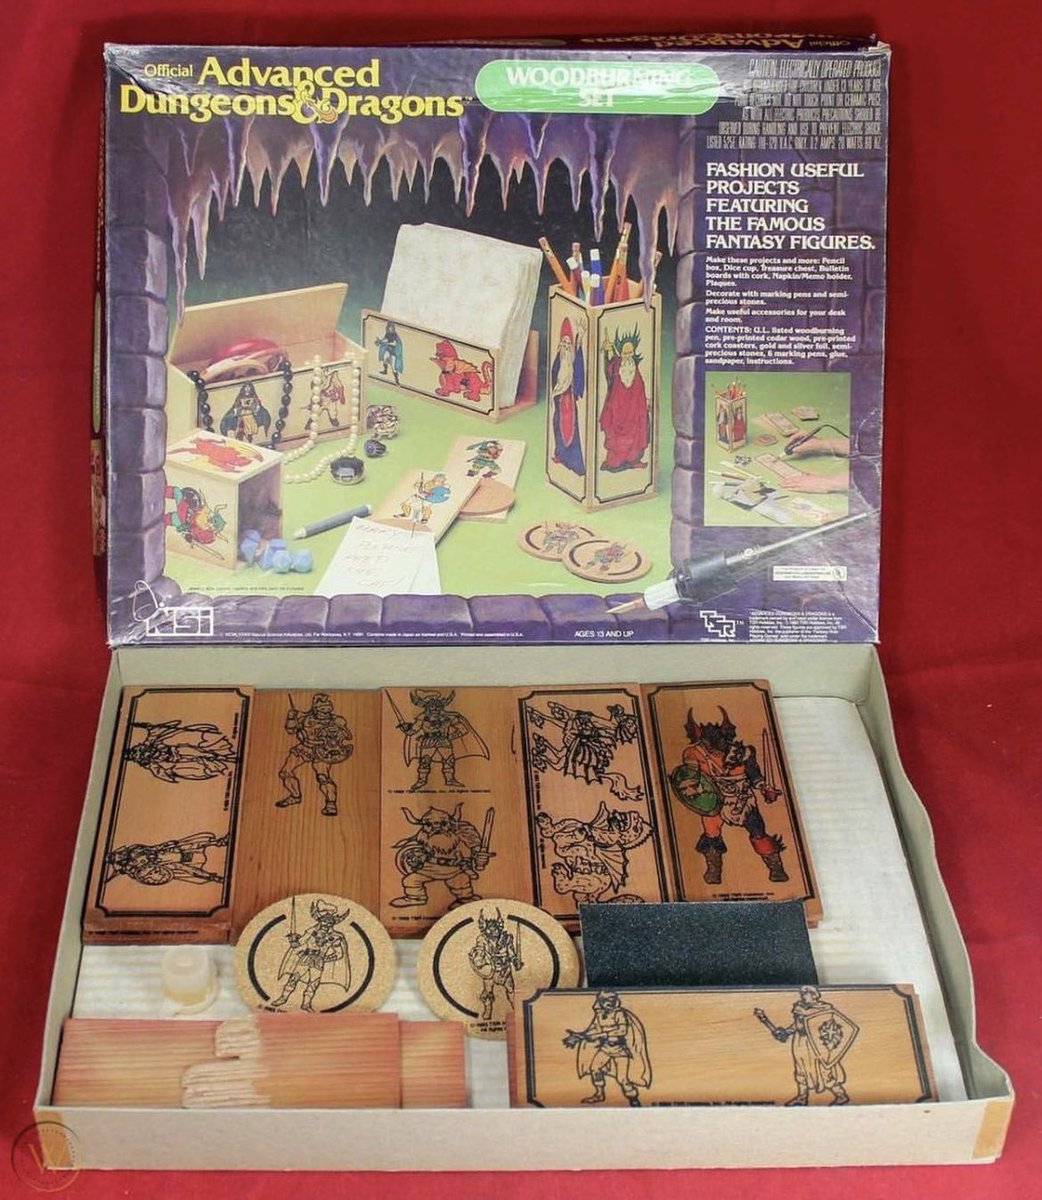 The 1980s TSR marketing machine knew no bounds as exemplified here in one of the rarest and strangest products to have the Dungeons and Dragons name attached to it. The Advanced Dungeons and Dragons Wood Burning Set, from 1983 #dnd #adnd